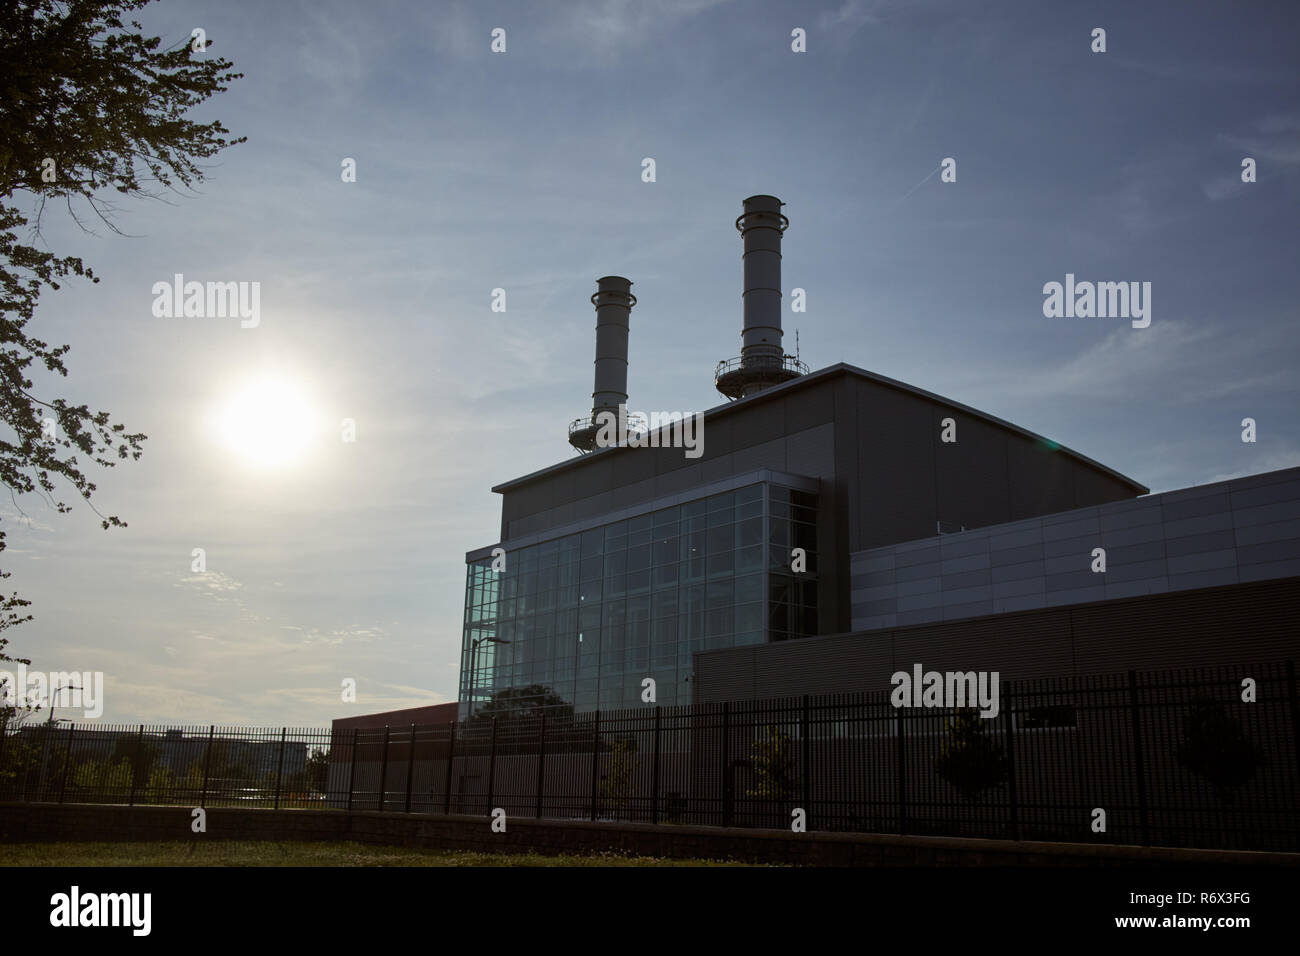 Gas-fired power plant built in 2017 in Holland, Michigan Stock Photo